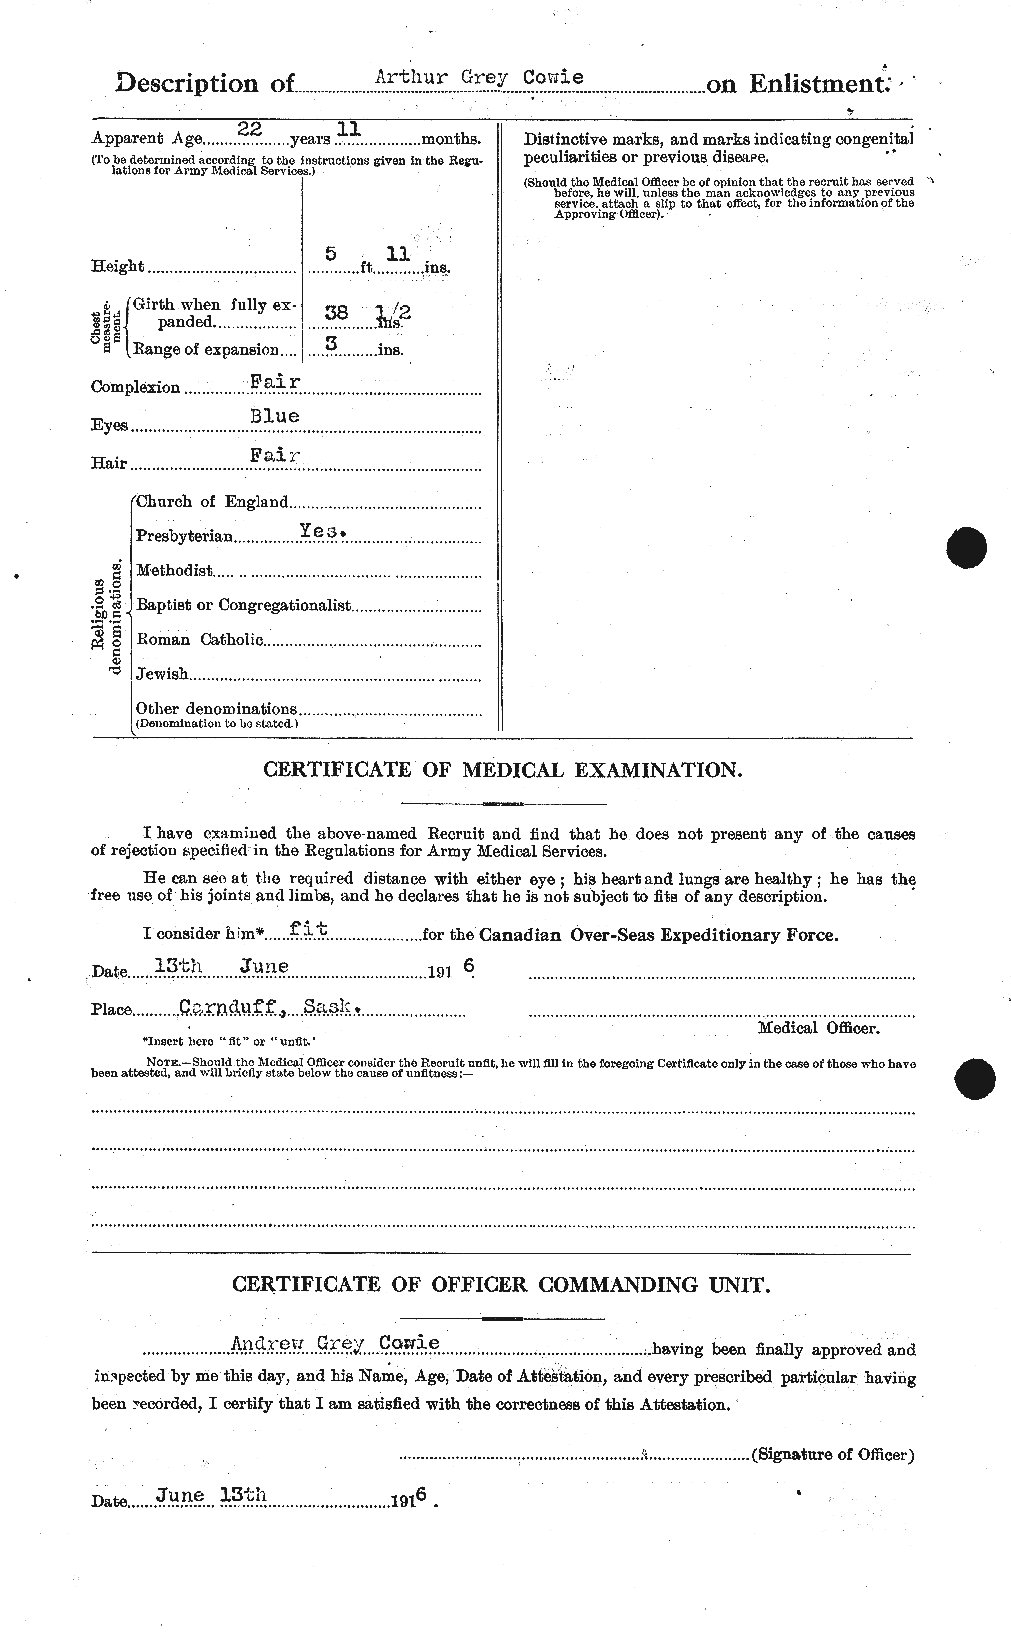 Personnel Records of the First World War - CEF 060035b